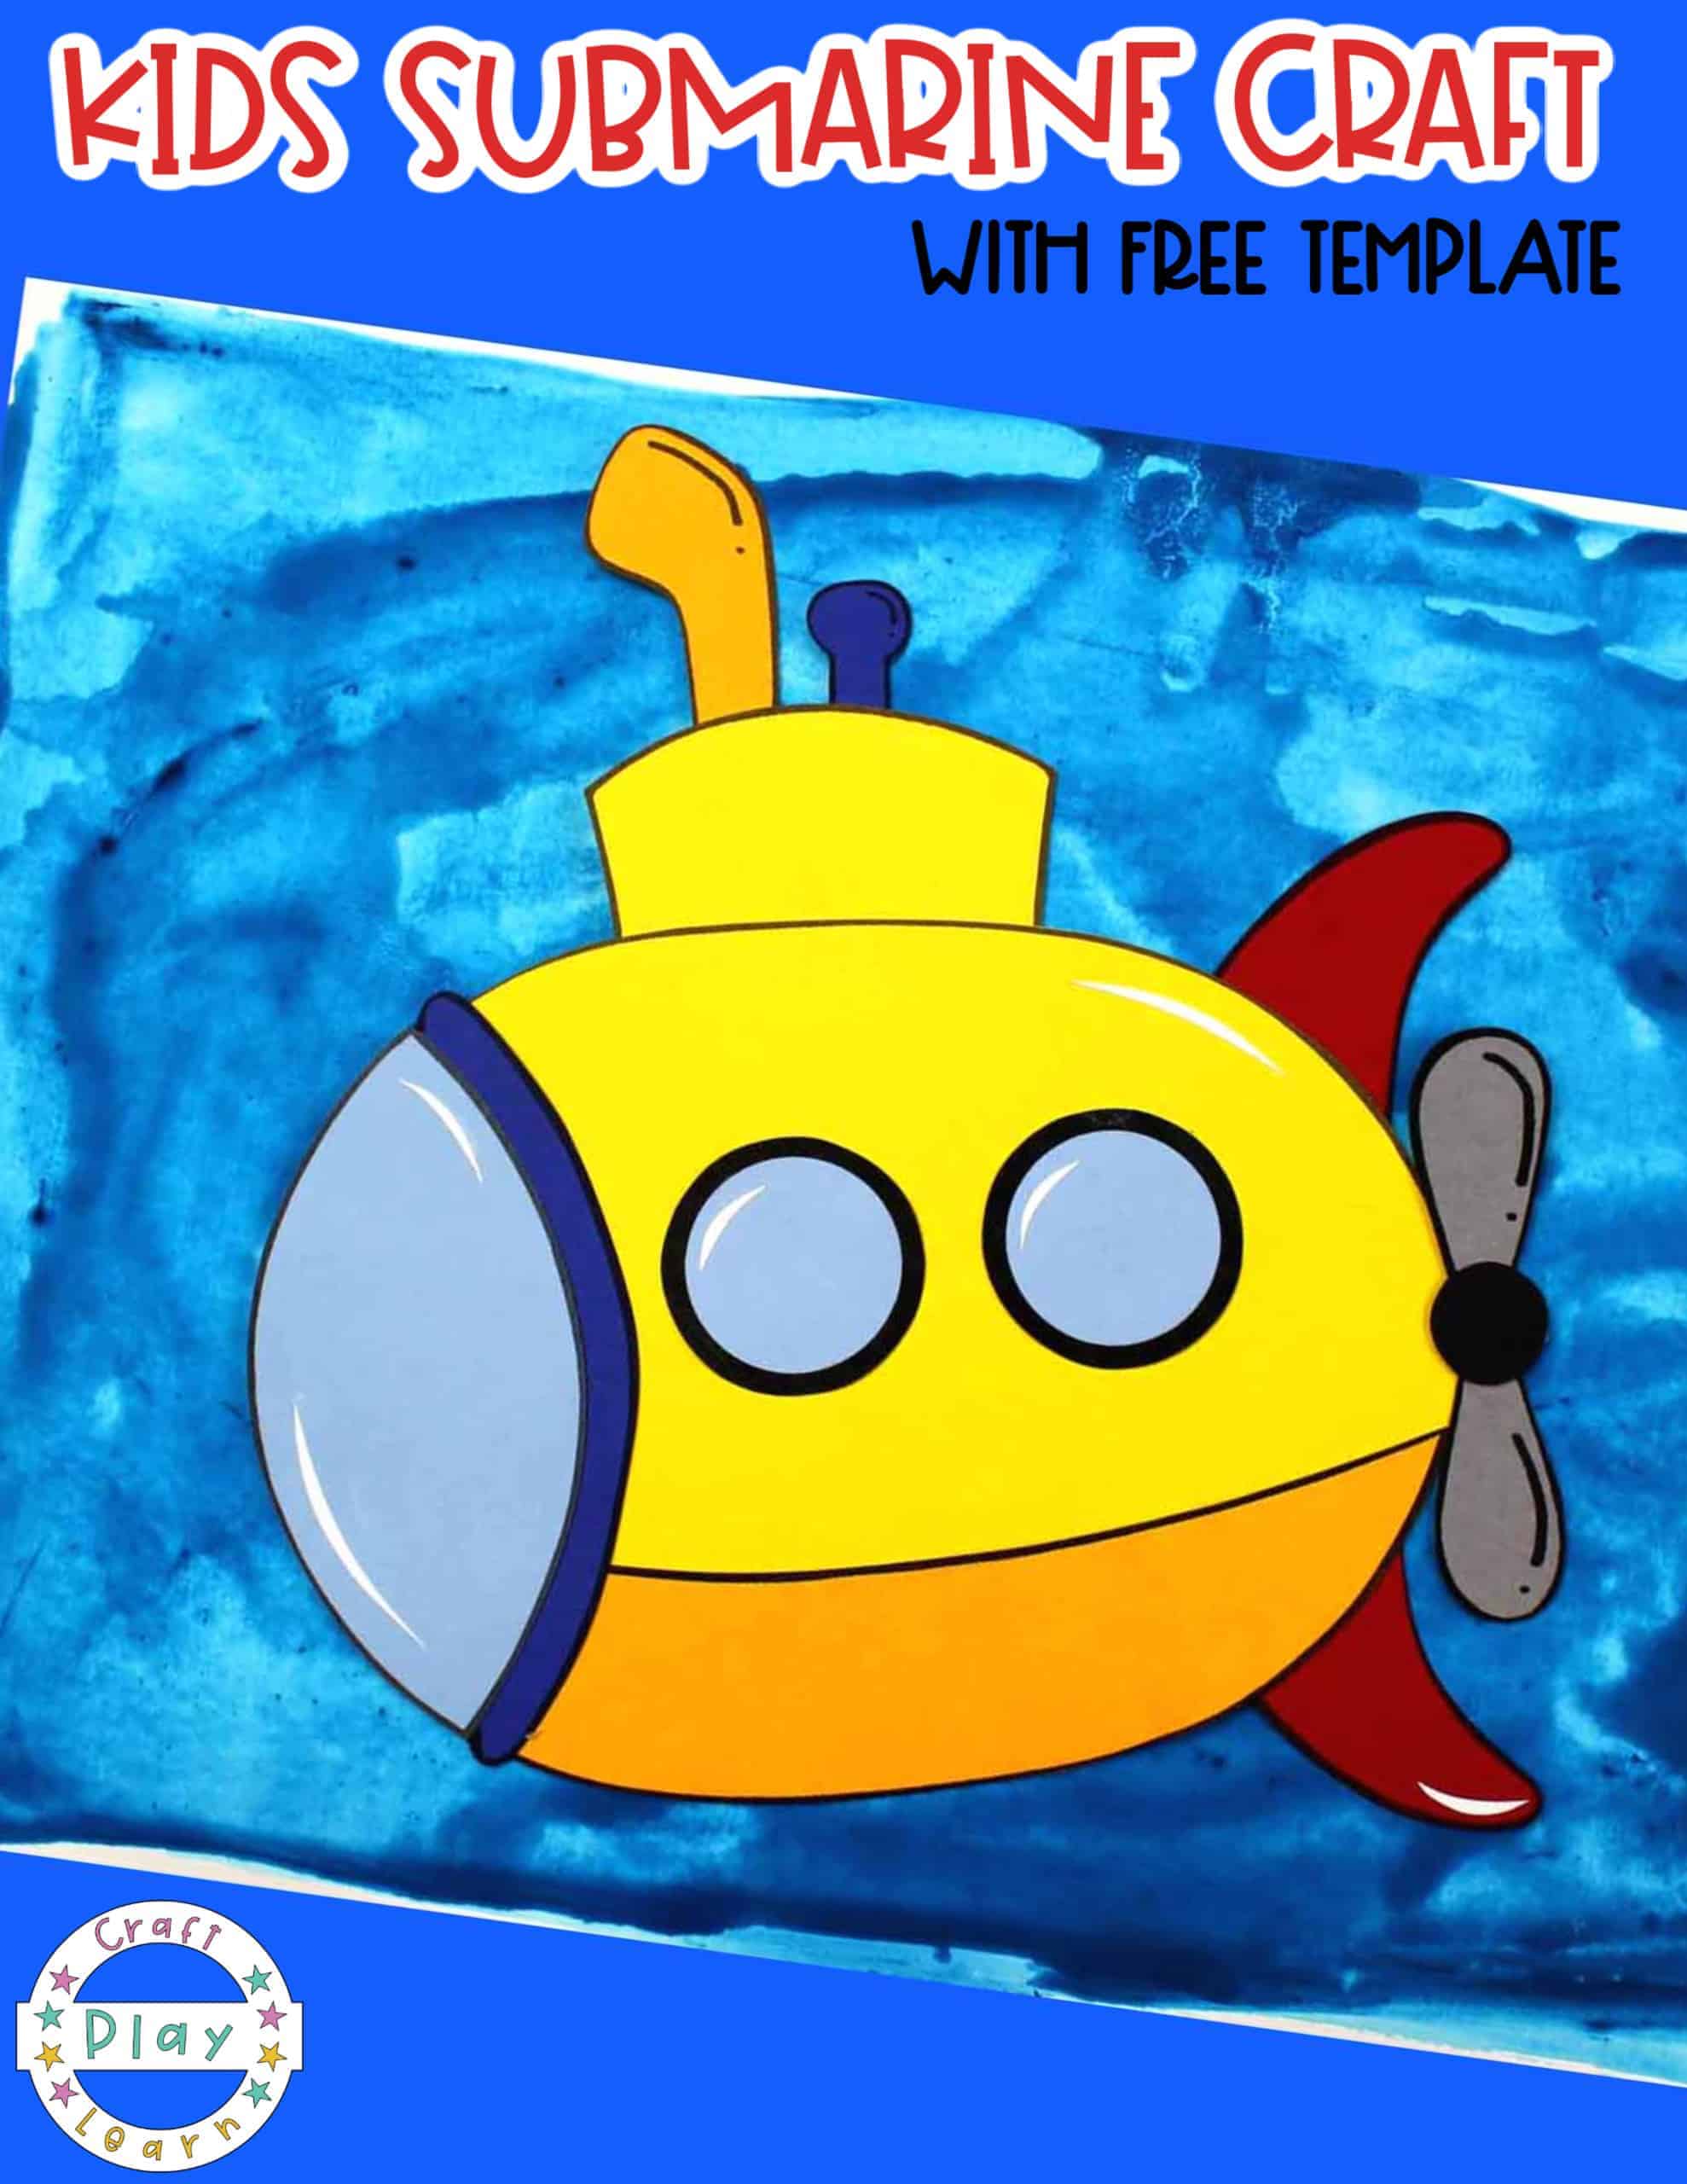 Easy Submarine Craft Activity For Kids - Craft Play Learn